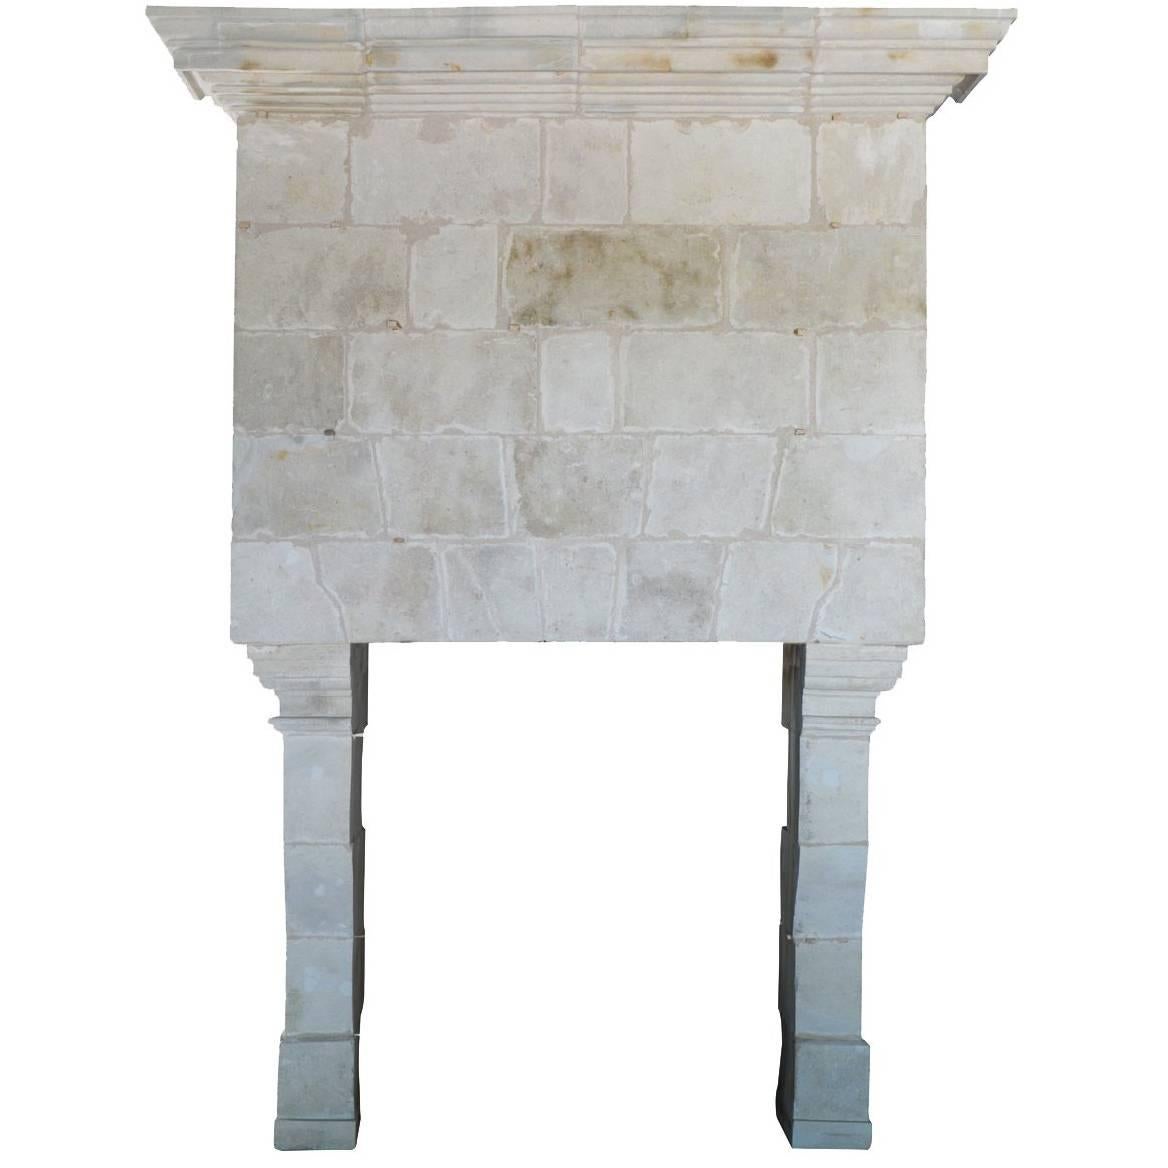 Louis XIII Period Stone Fireplace with Overmantel Piece, 17th Century For Sale